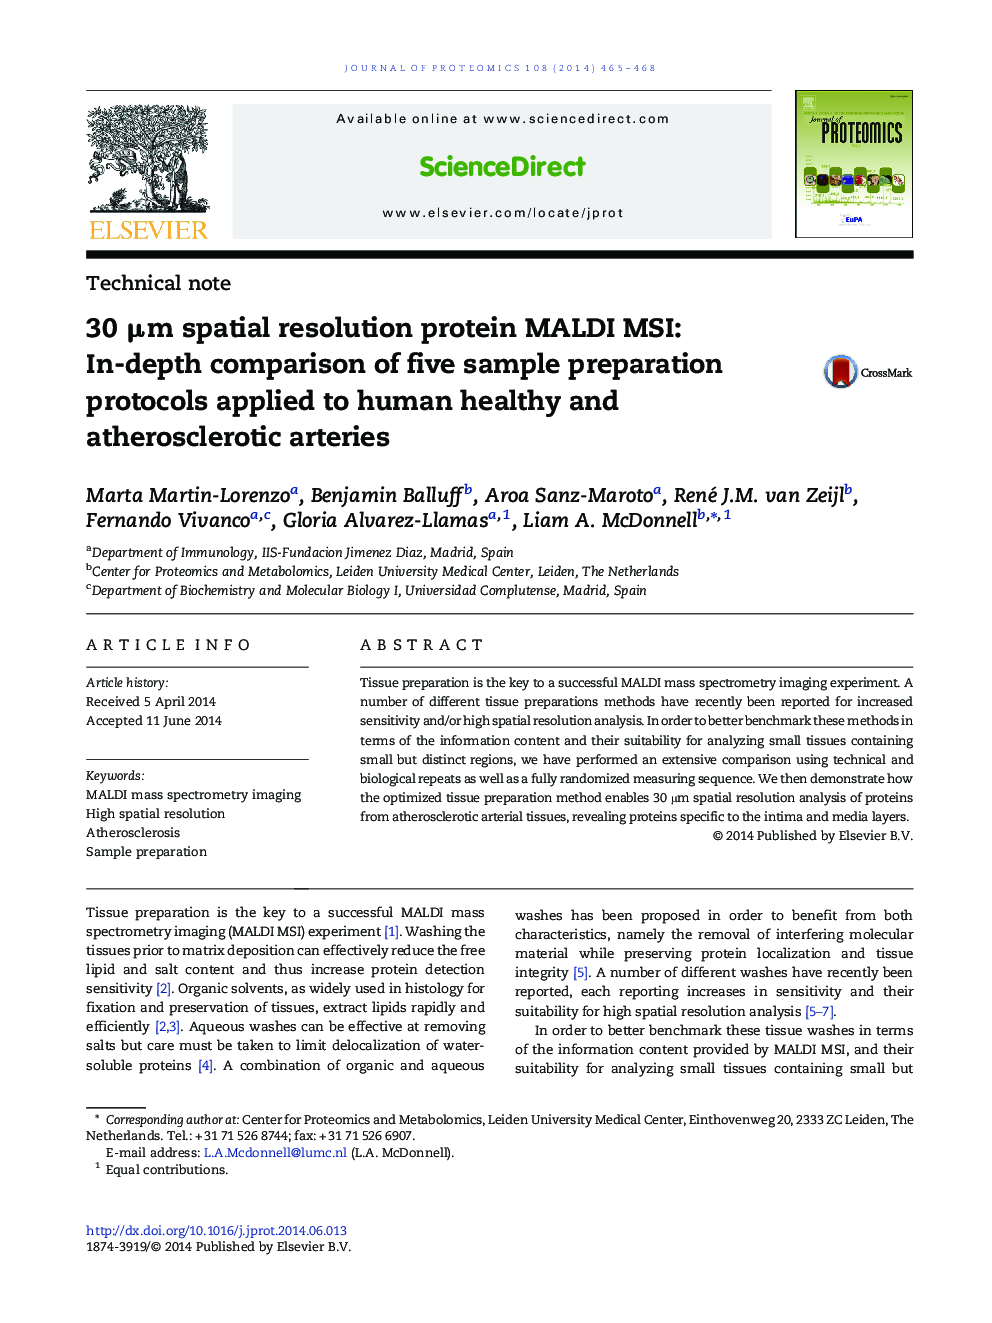 30Â Î¼m spatial resolution protein MALDI MSI: In-depth comparison of five sample preparation protocols applied to human healthy and atherosclerotic arteries